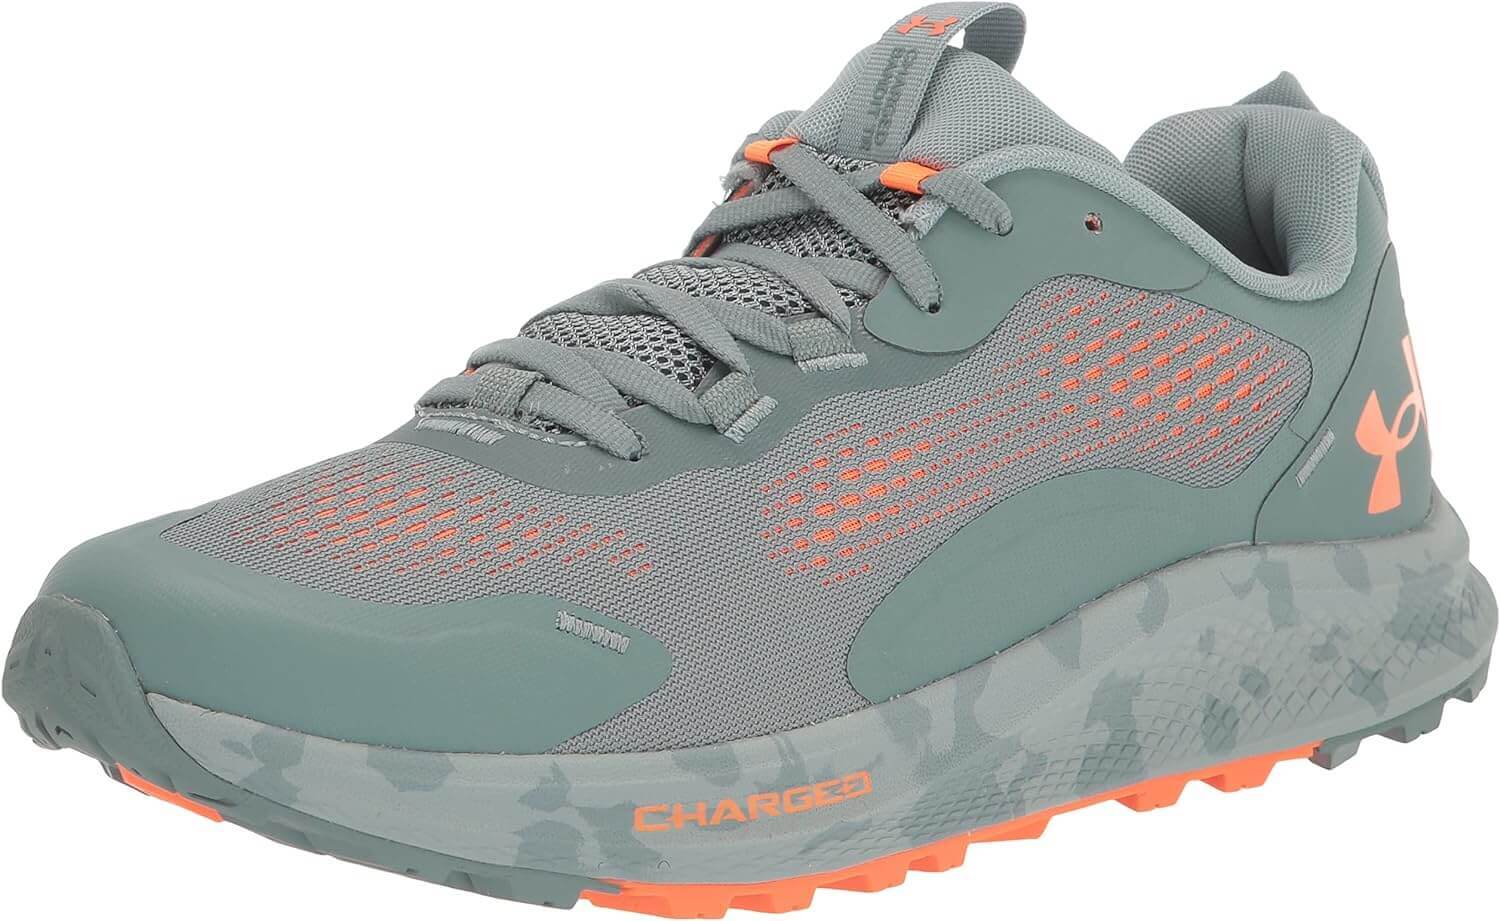 Shop The Latest >Under Armour Men’s Charged Bandit Trail 2 > *Only $109.13*> From The Top Brand > *Under Armourl* > Shop Now and Get Free Shipping On Orders Over $45.00 >*Shop Earth Foot*